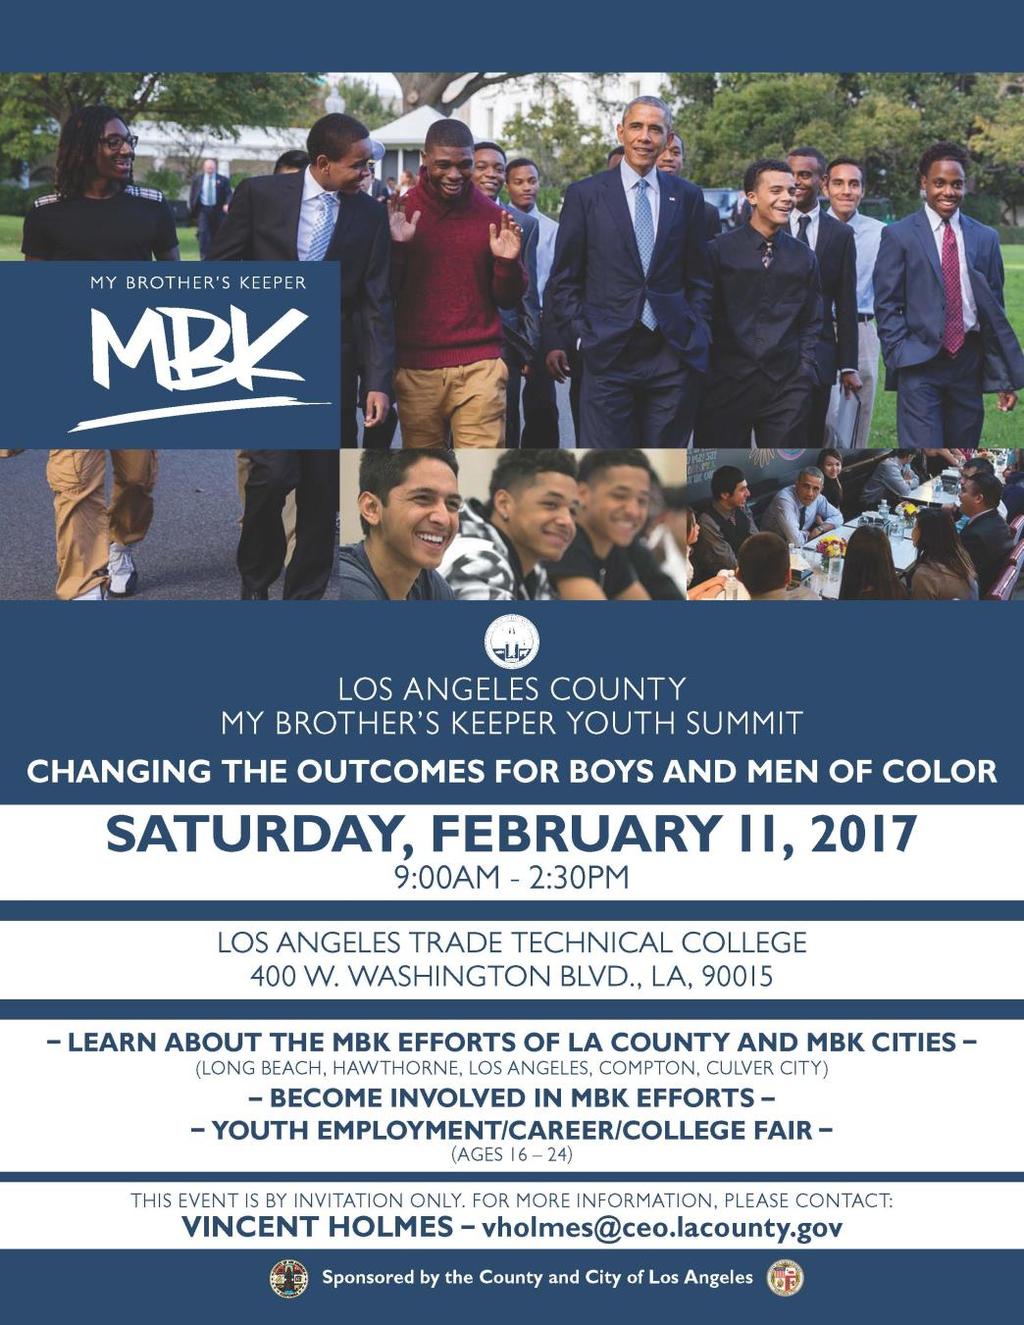 Also on Saturday, LATTC will have a team at the Black College Expo being held at the LA Convention Center.